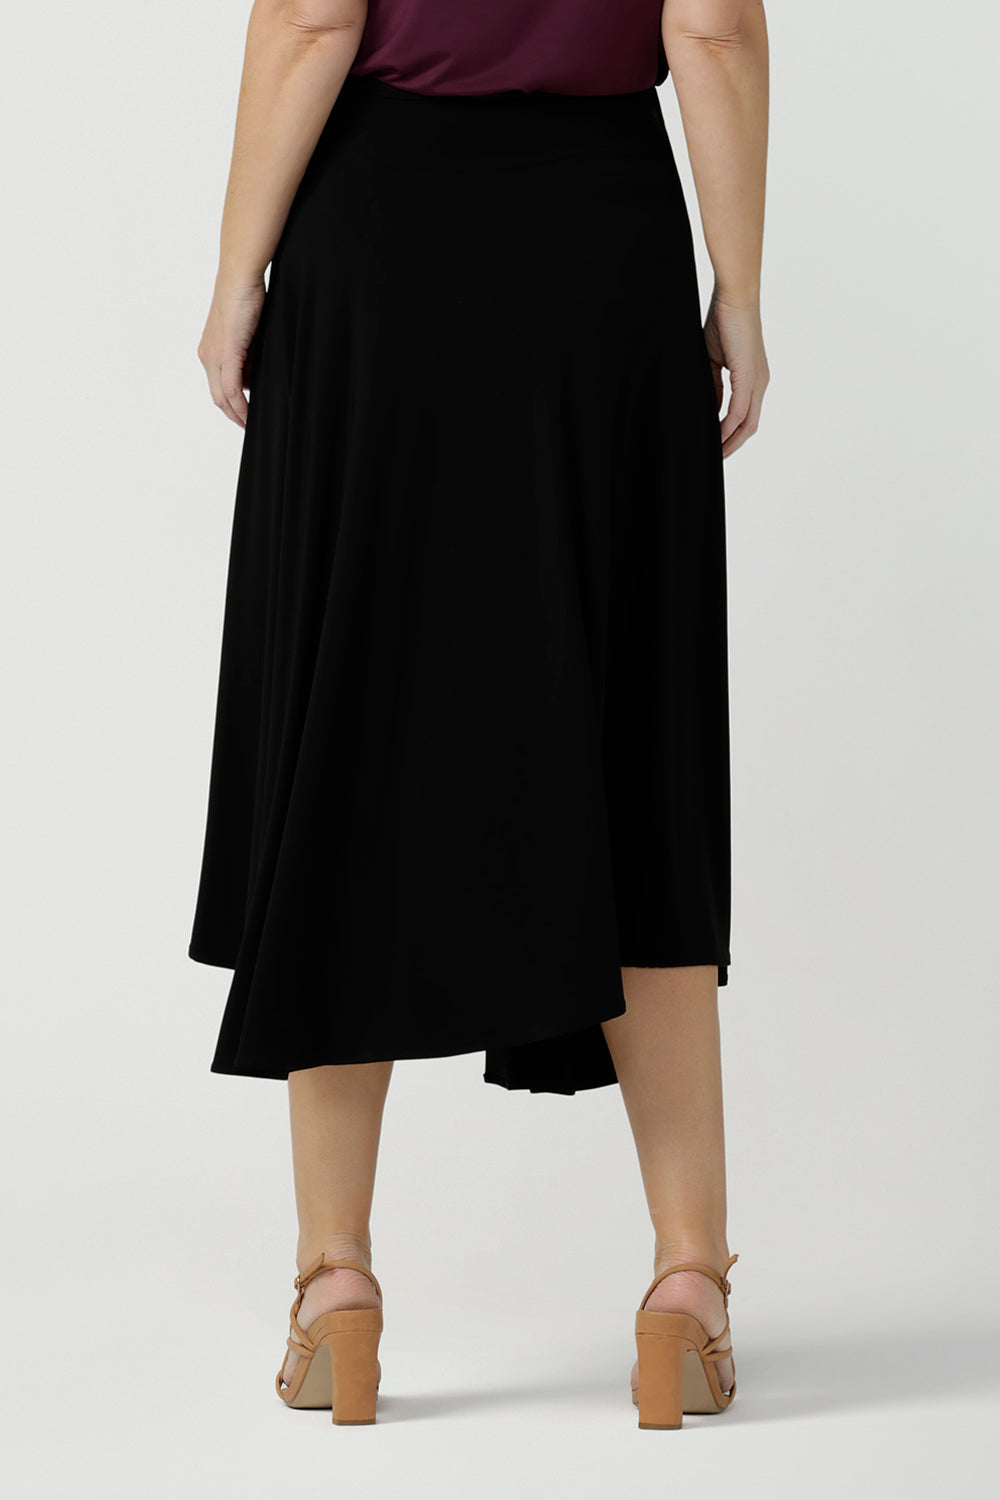 Back view of a size 10, 40 plus woman wears an asymmetric skirt in black jersey. Worn with a plum red cami top, this comfortable jersey skirt works for work wear and eveningwear. Made in Australia by women's clothing brand, Leina & Fleur in petite, mid size and plus sizes. 